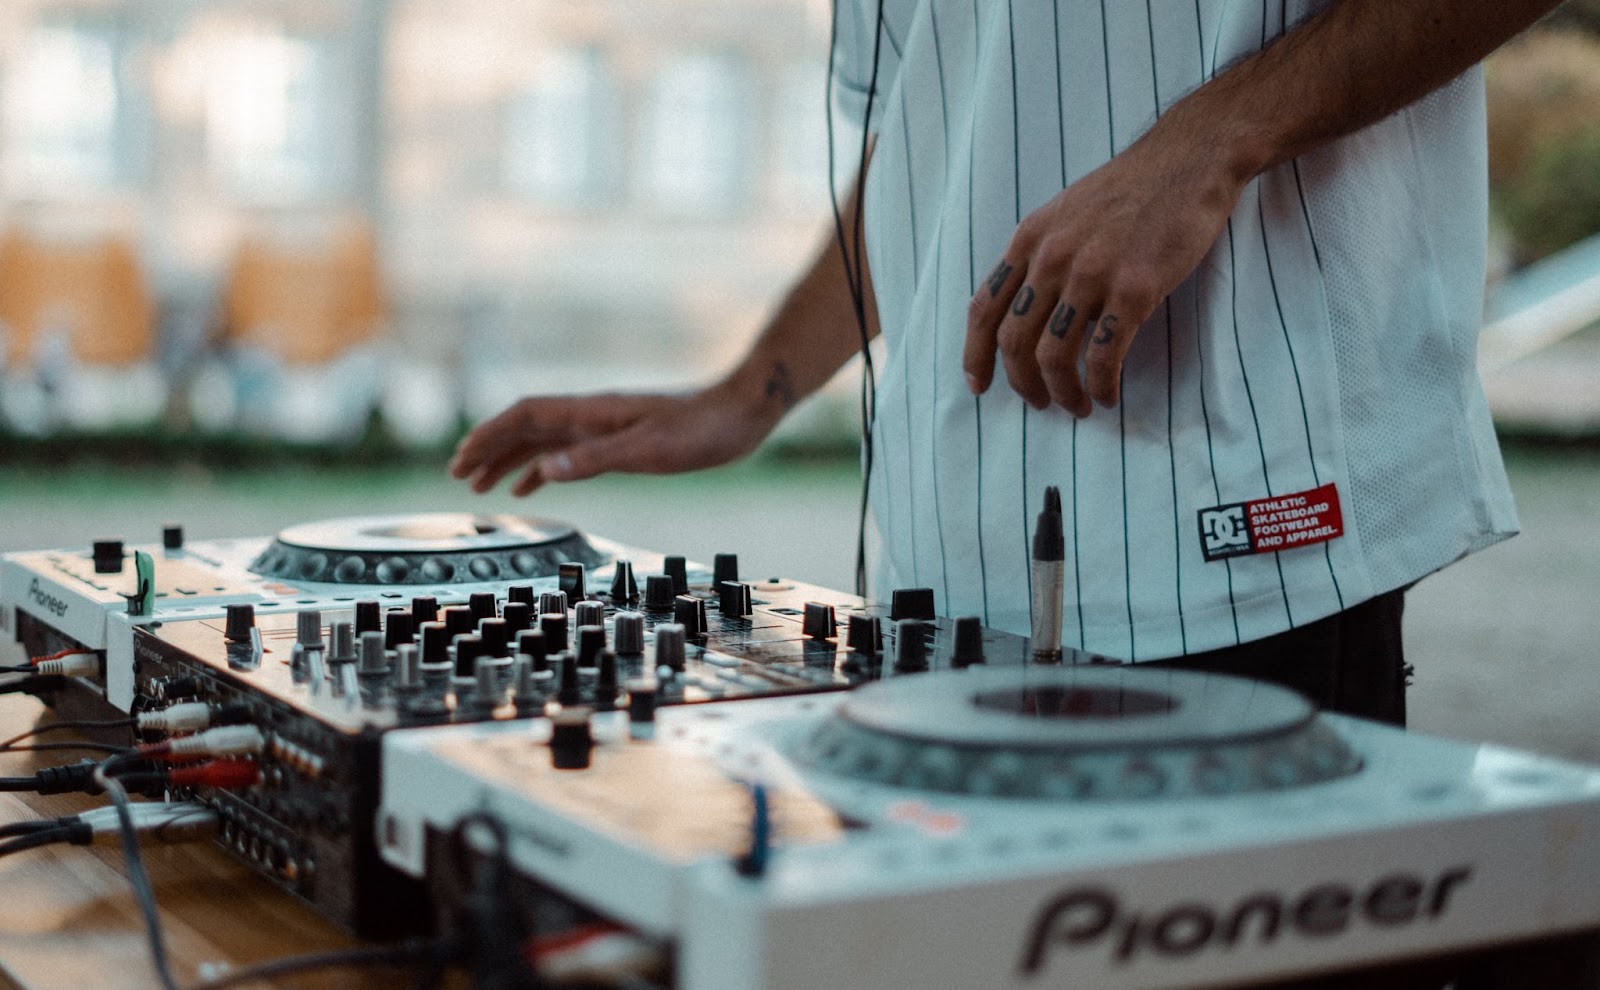 A close-up of a DJ's hands adjusting knobs on a Pioneer DJ mixer at an outdoor event, set against a casual, daylit backdrop.